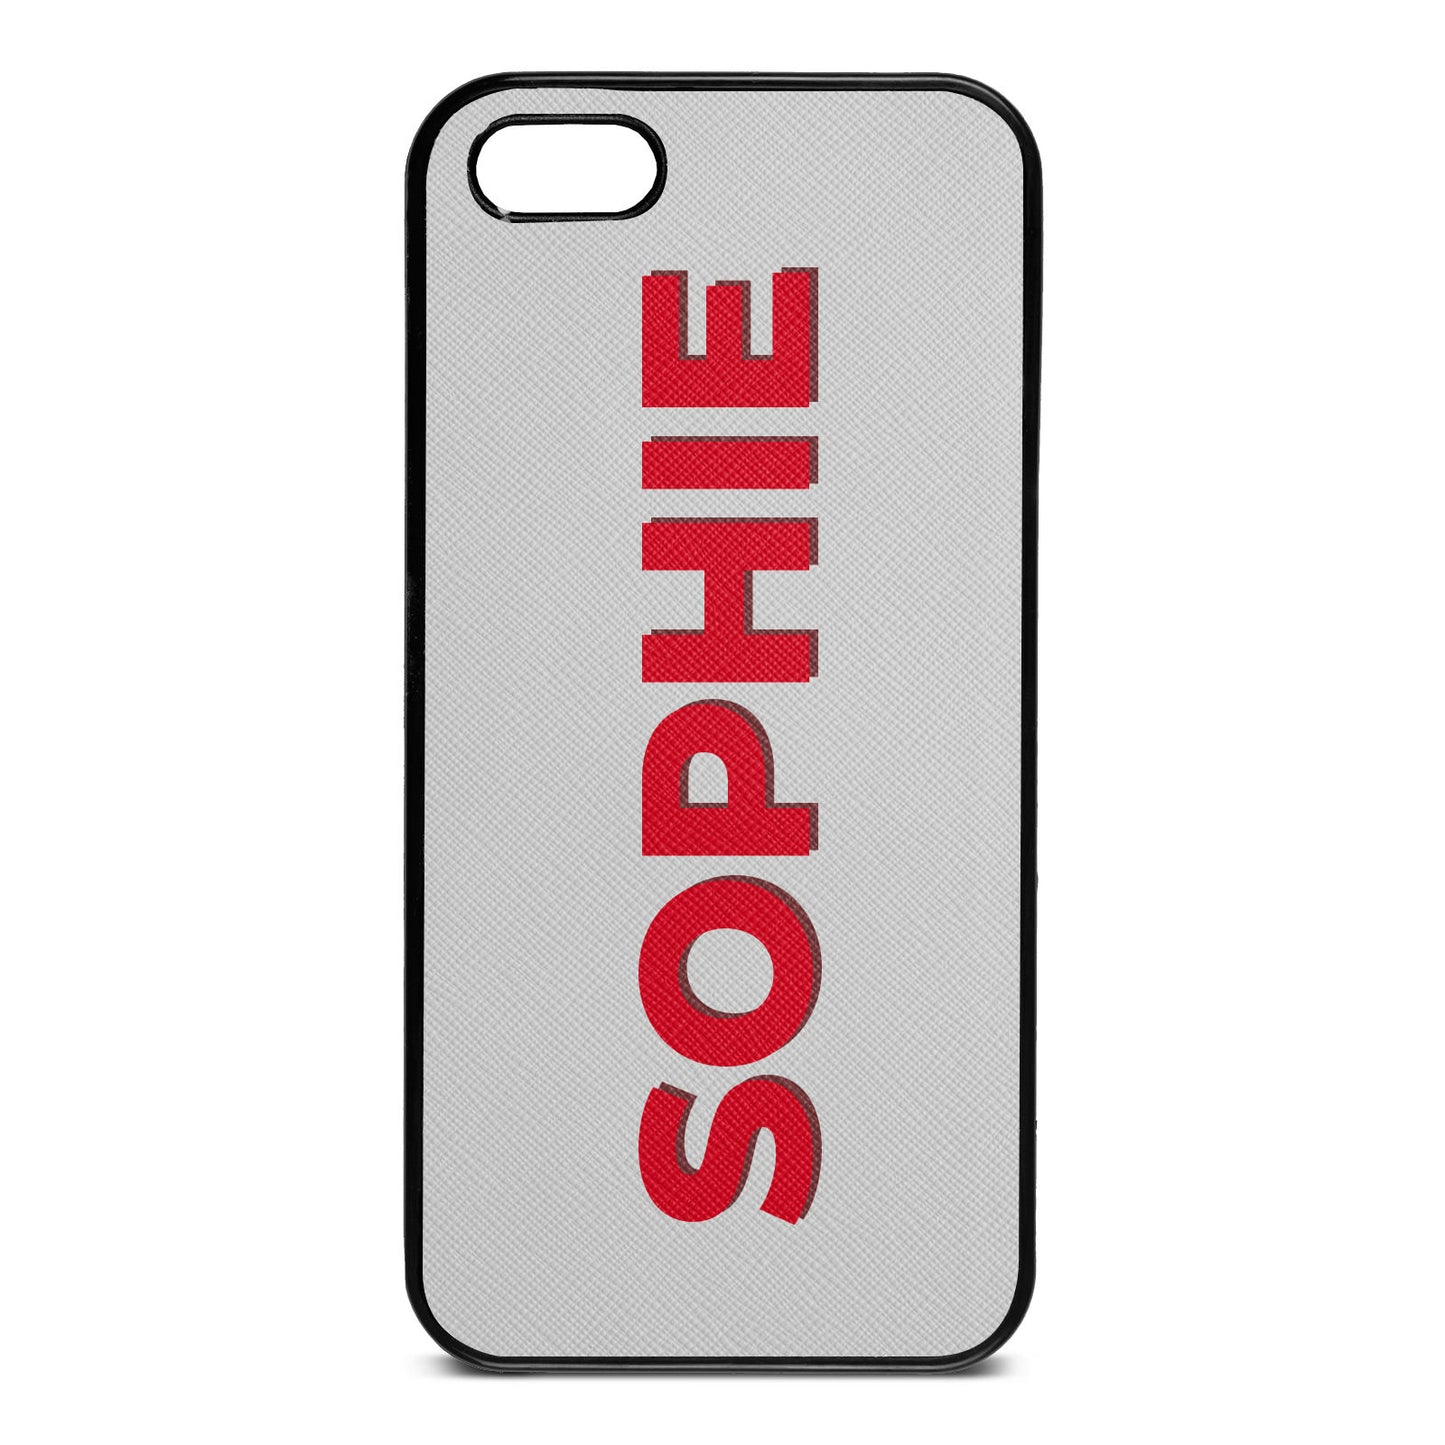 Personalised Silver Saffiano Leather iPhone 5 Case